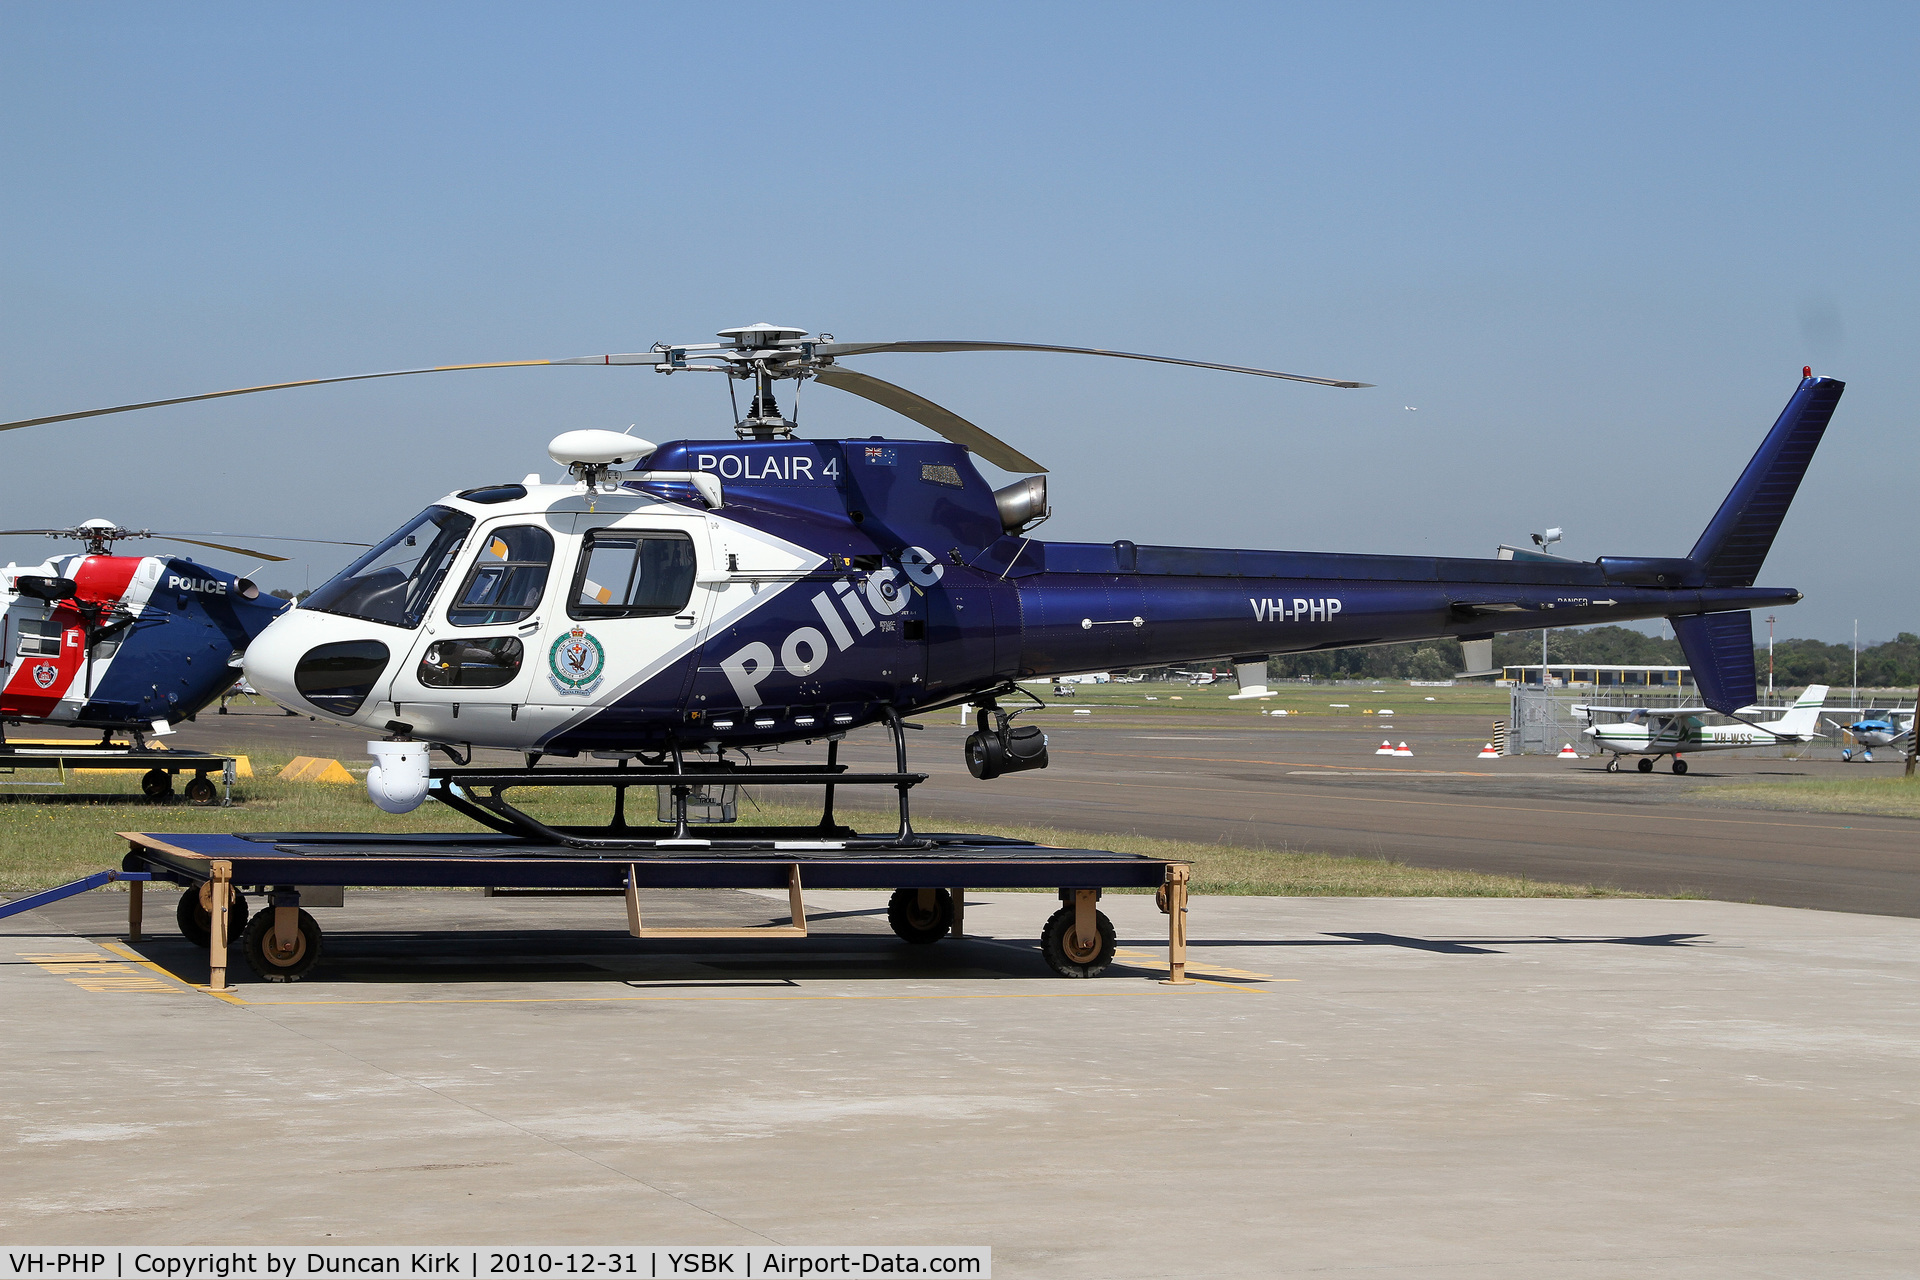 VH-PHP, 2007 Eurocopter AS-350B-2 Ecureuil Ecureuil C/N 4200, Another New South Wales copter